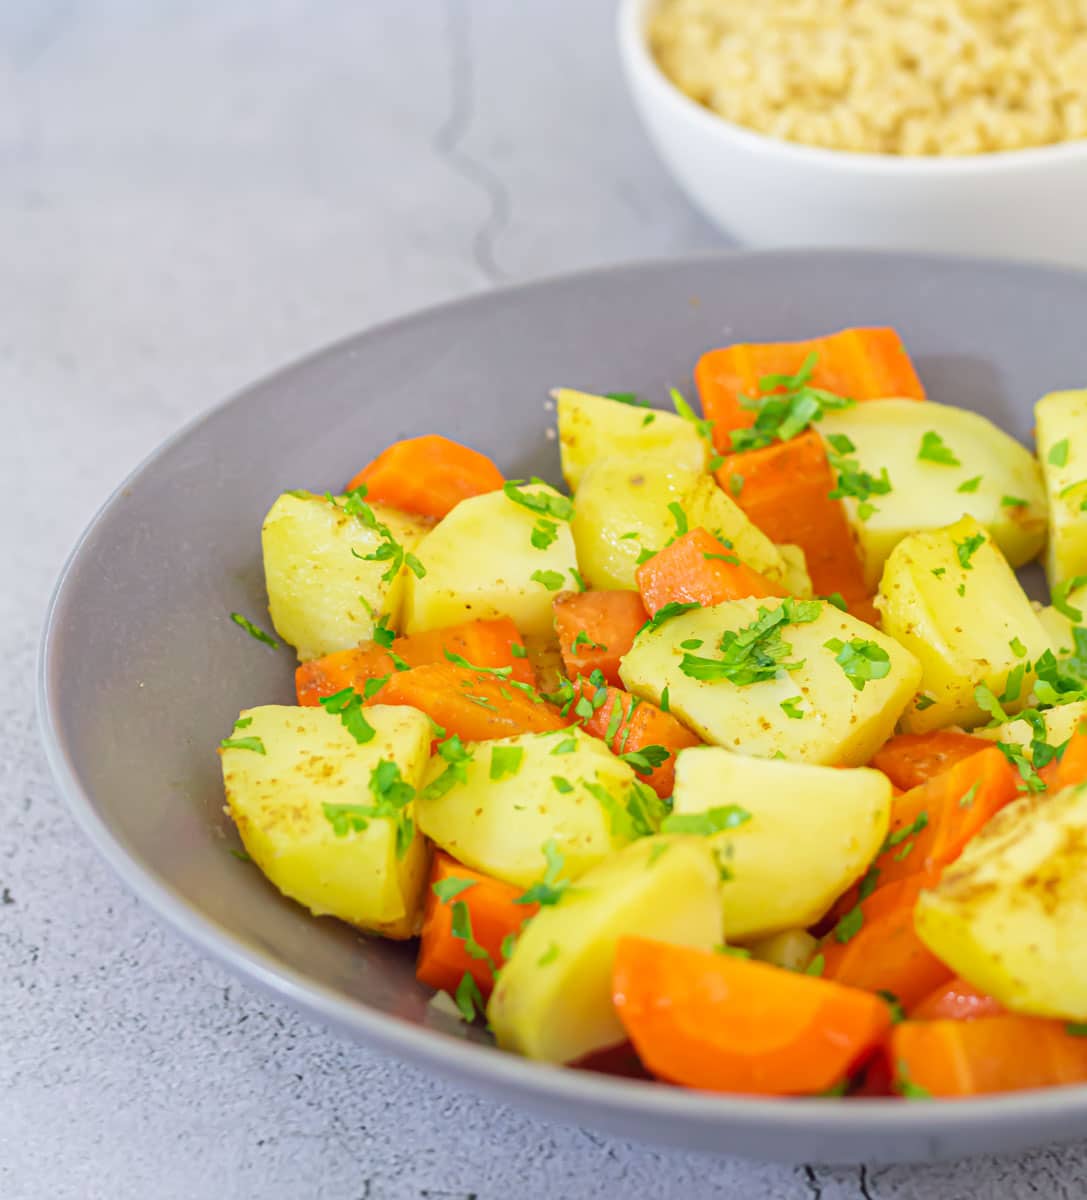 Steamed potatoes and carrots in a bowl.